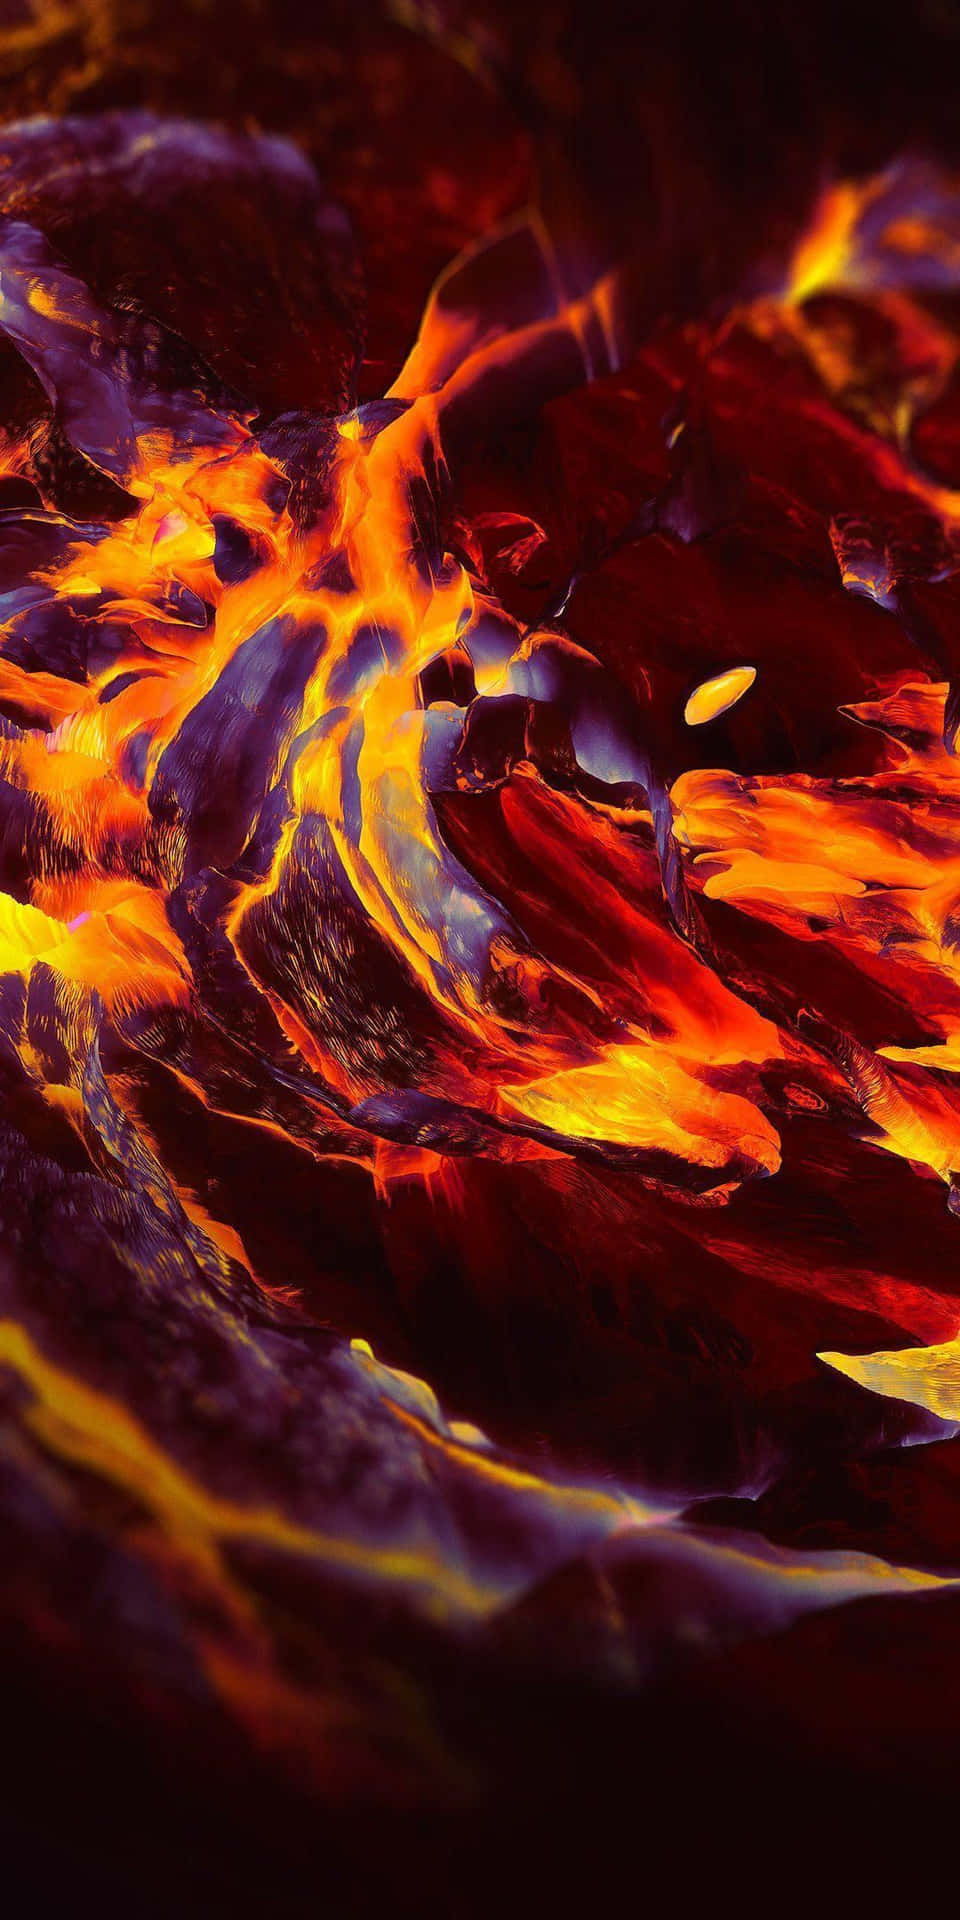 Iphone Xr Stock Volcano Hot Red Lava Wallpaper